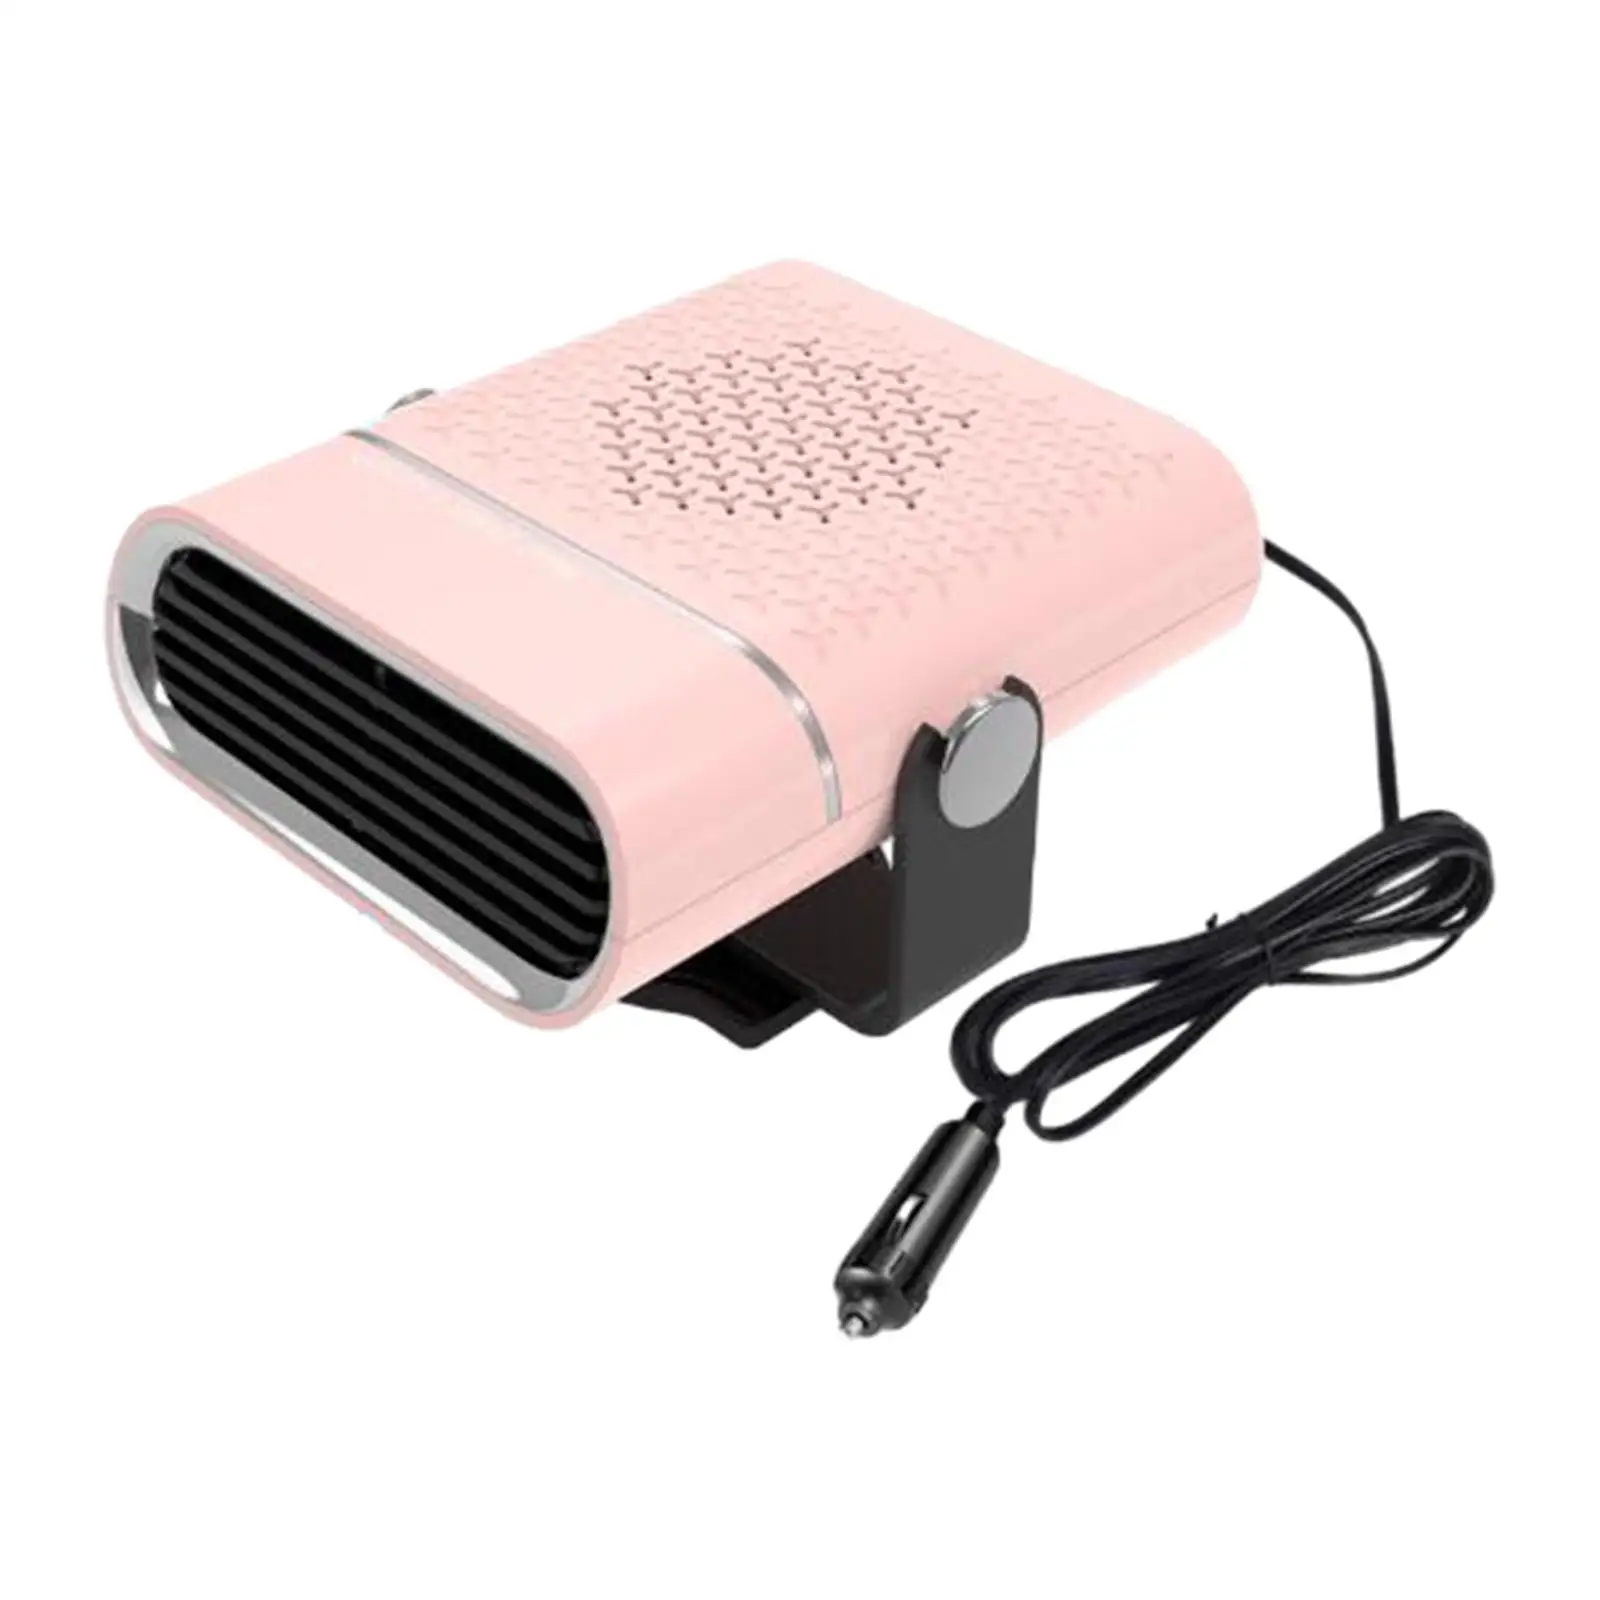 Car Heater for Winter 2 in 1 Rotatable Windshield Defroster Demister 260W Heating and Cooling Auto Vehicle Heater Car Fan Heater